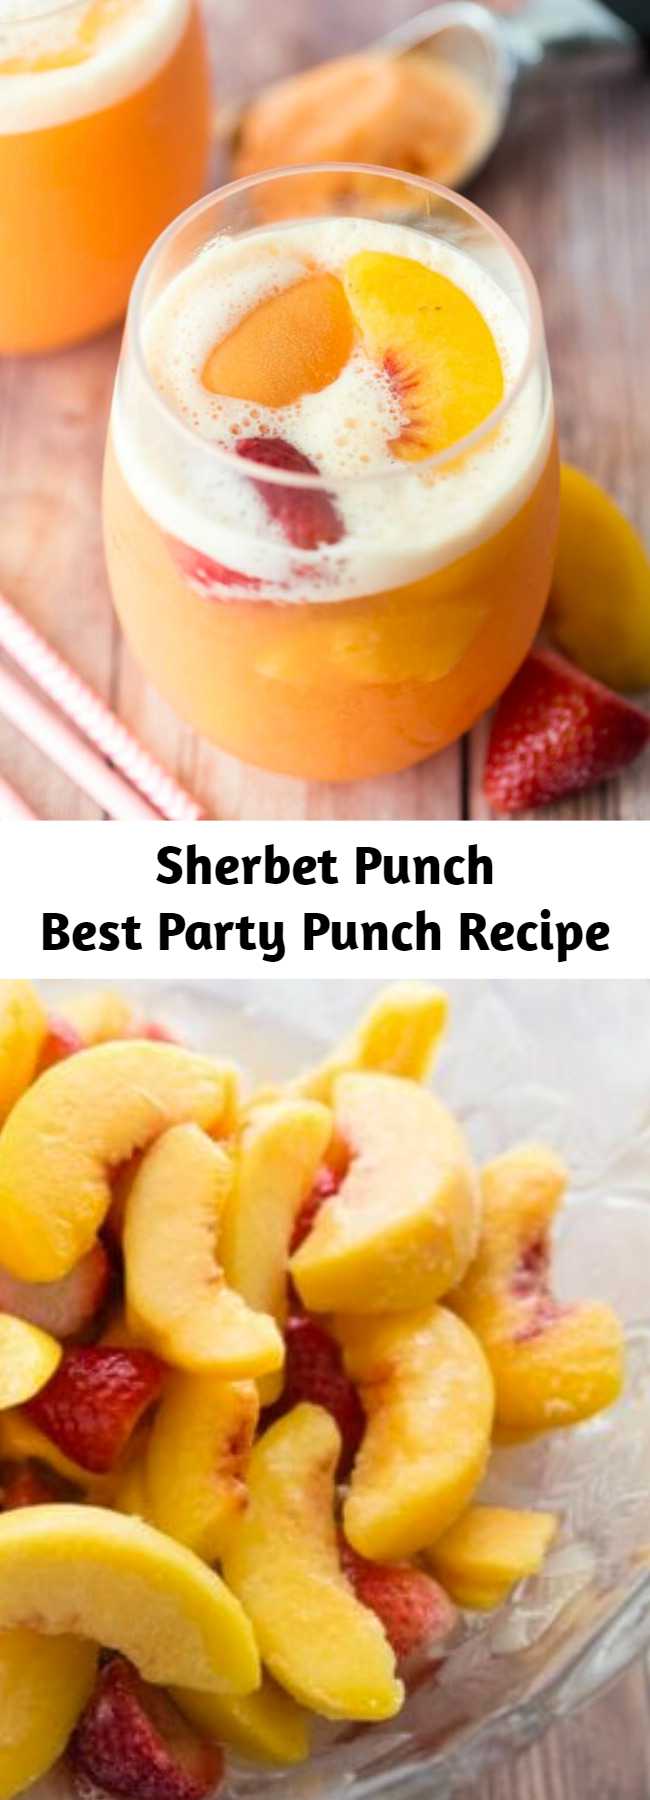 Sherbet punch made with ginger ale, white grape juice, peaches, and strawberries is the best punch recipe ever! Perfect party punch for your next baby shower, wedding shower, summer party, or random Tuesday afternoon!